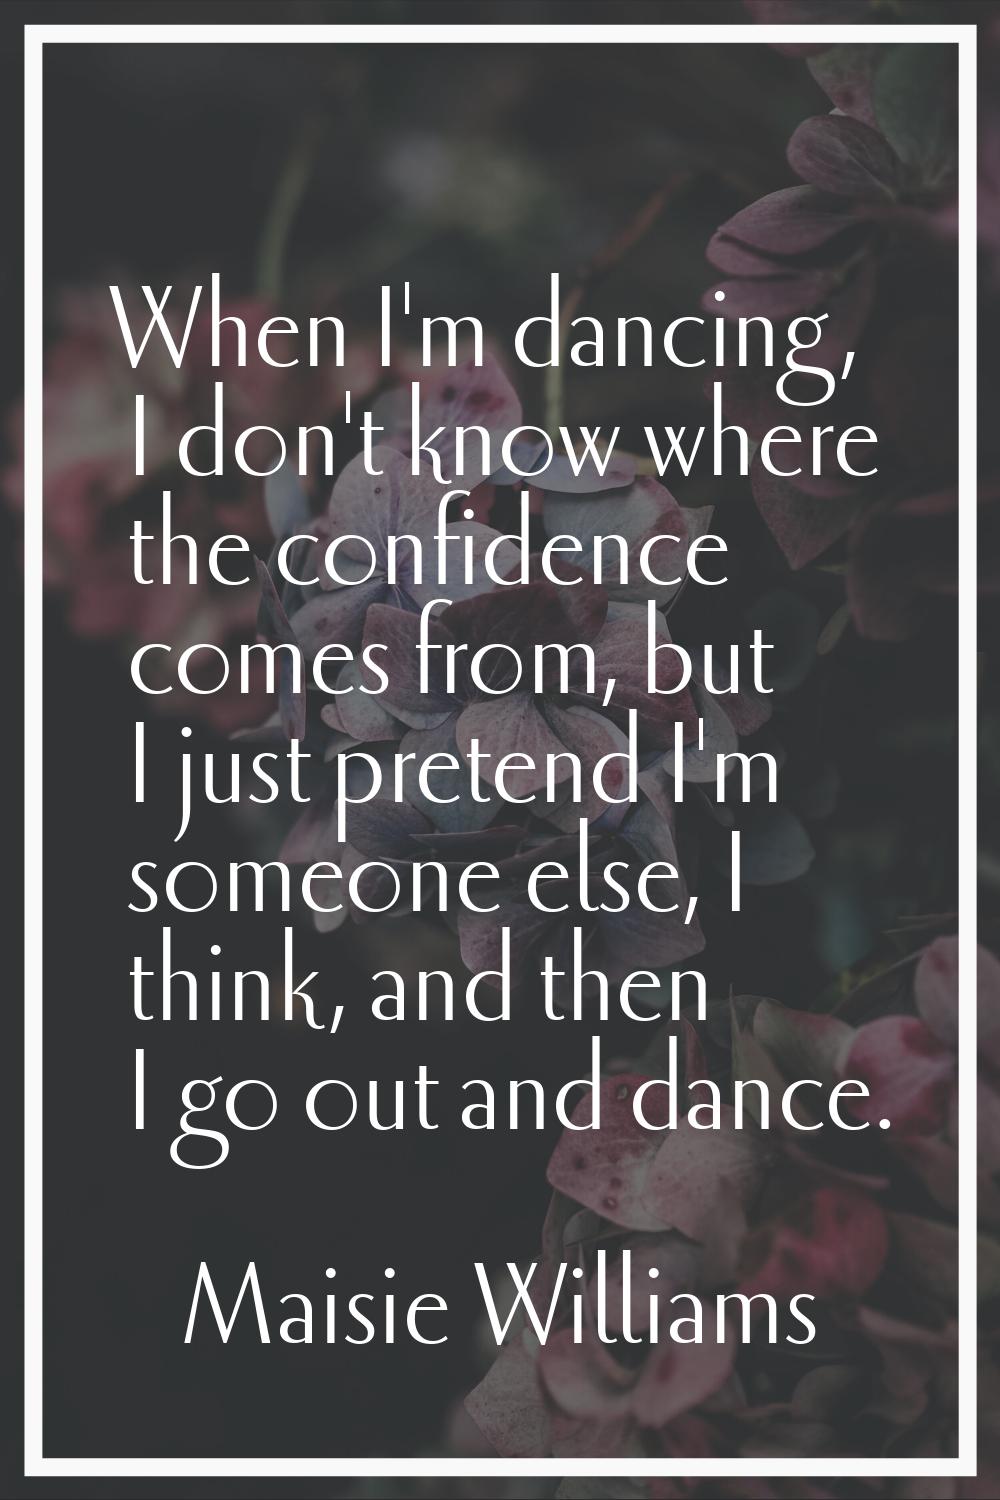 When I'm dancing, I don't know where the confidence comes from, but I just pretend I'm someone else